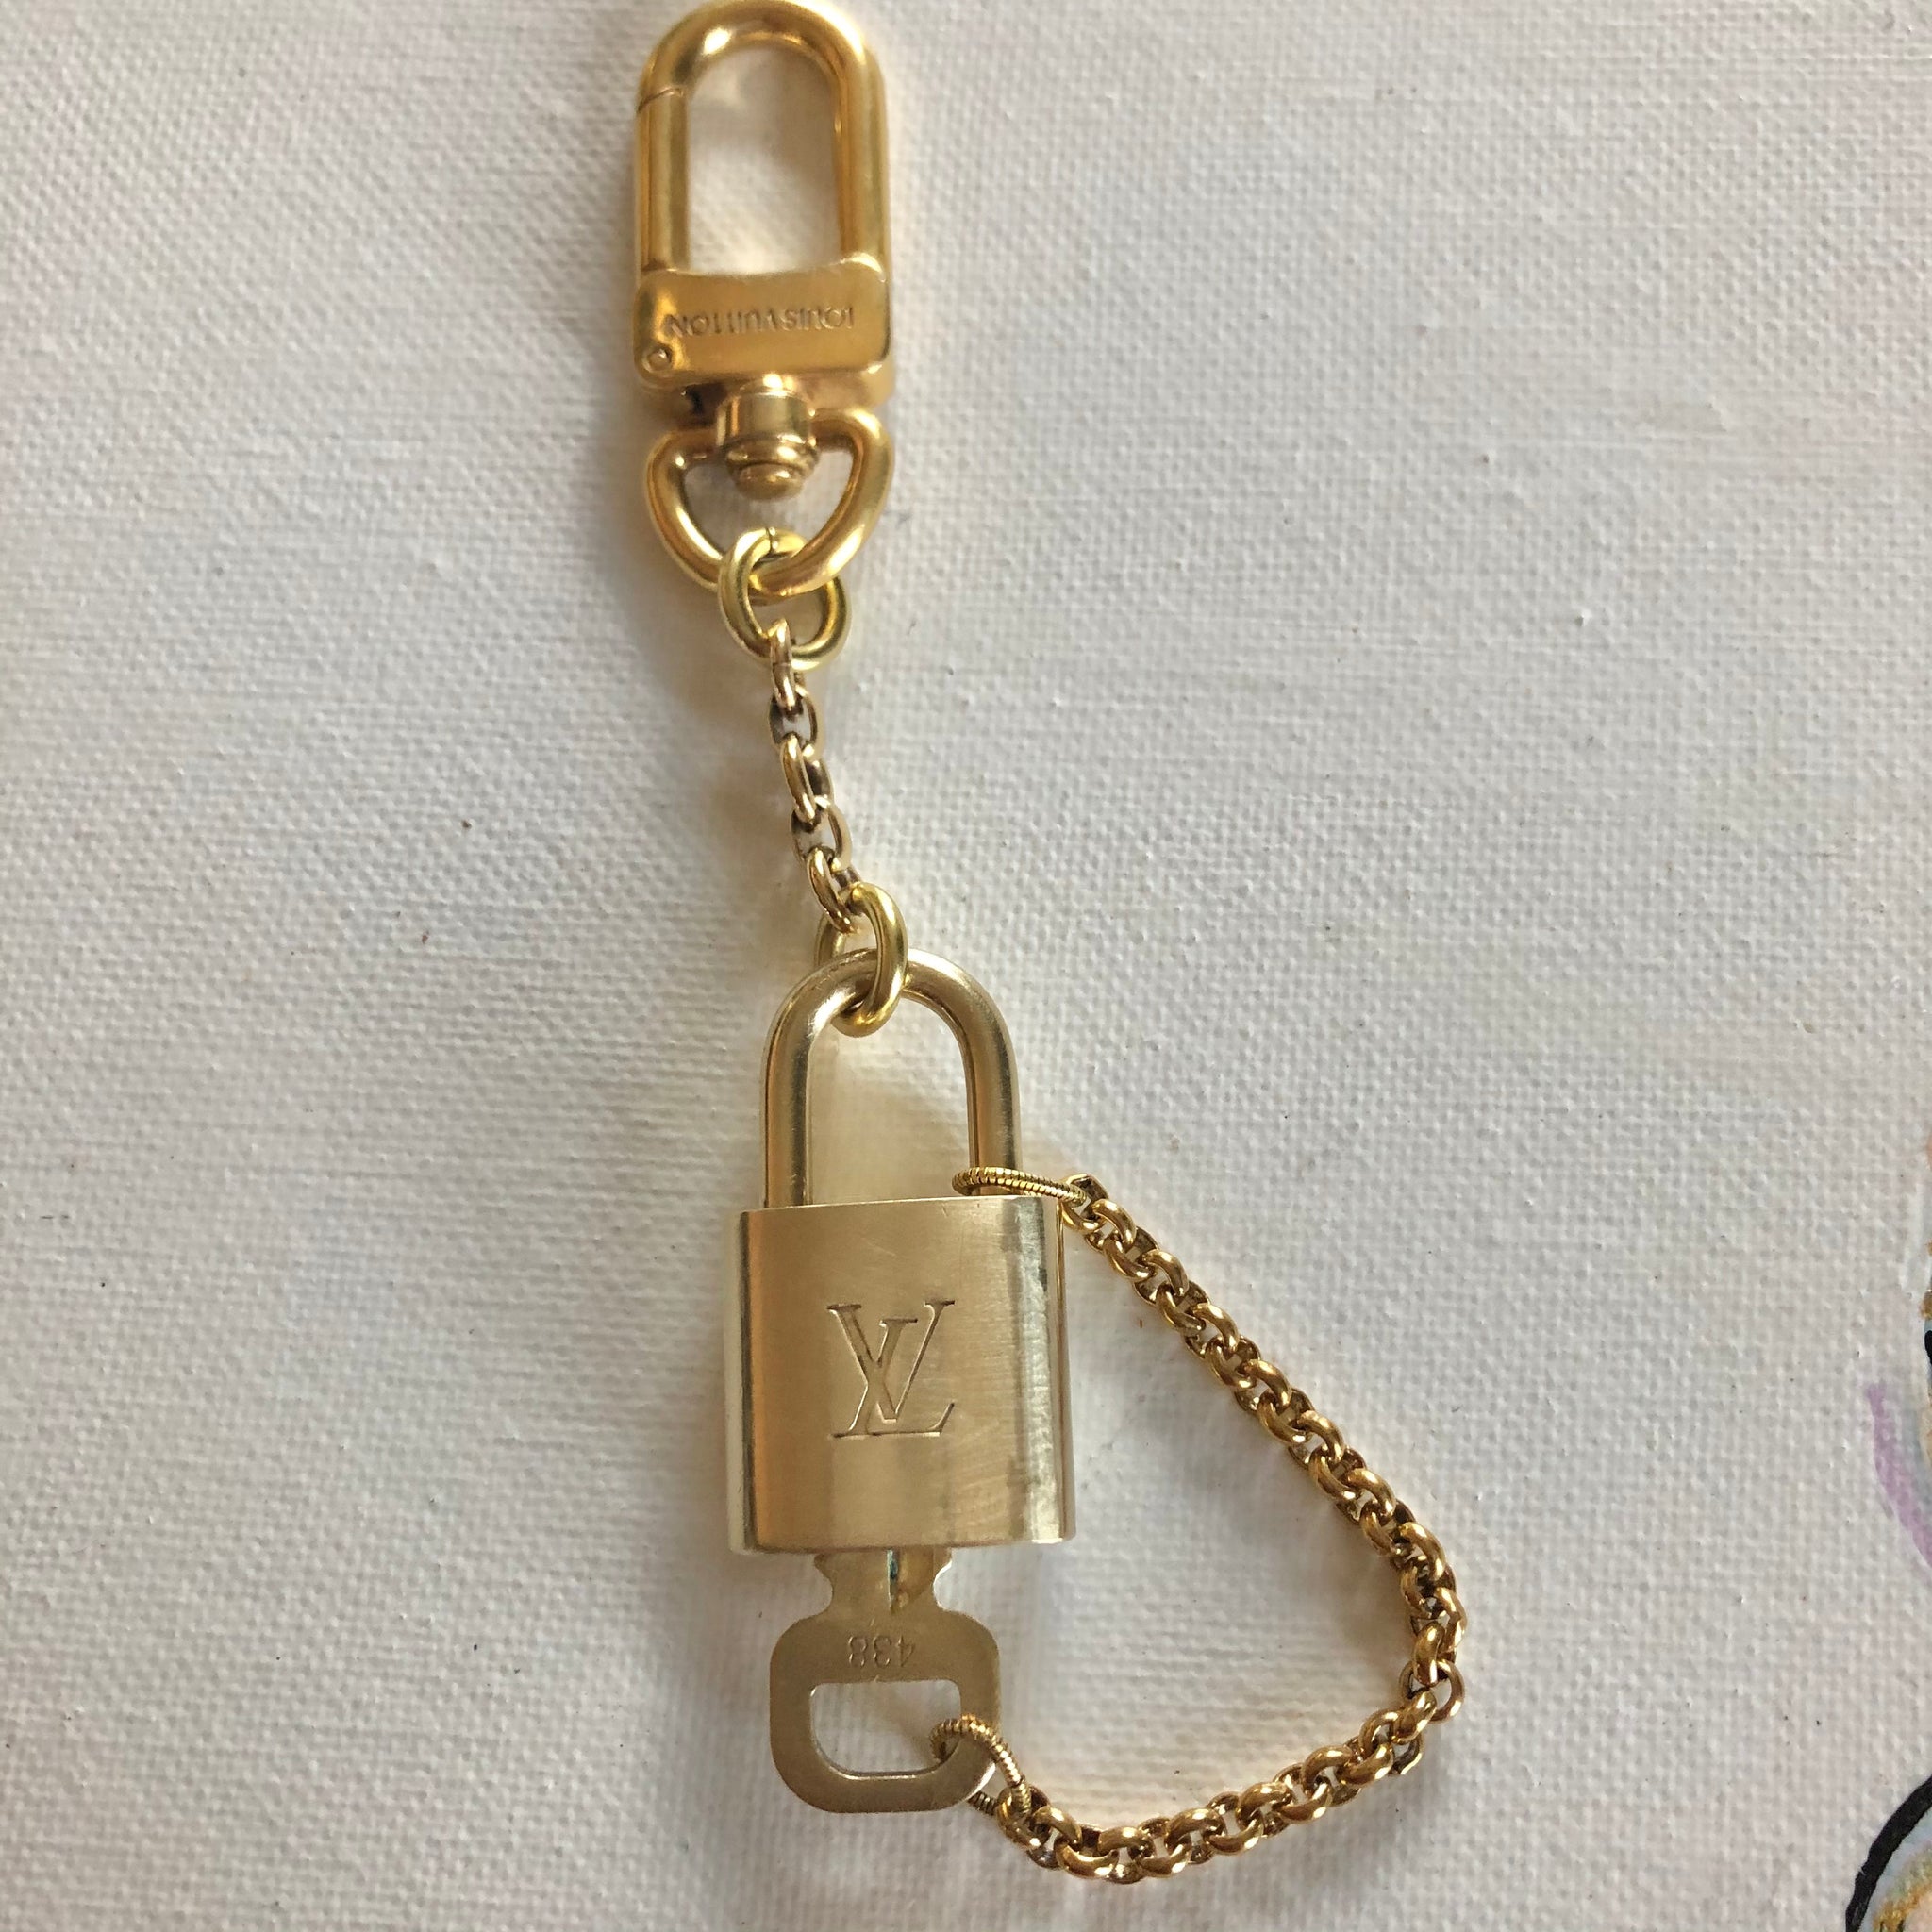 authentic louis vuitton lock and key